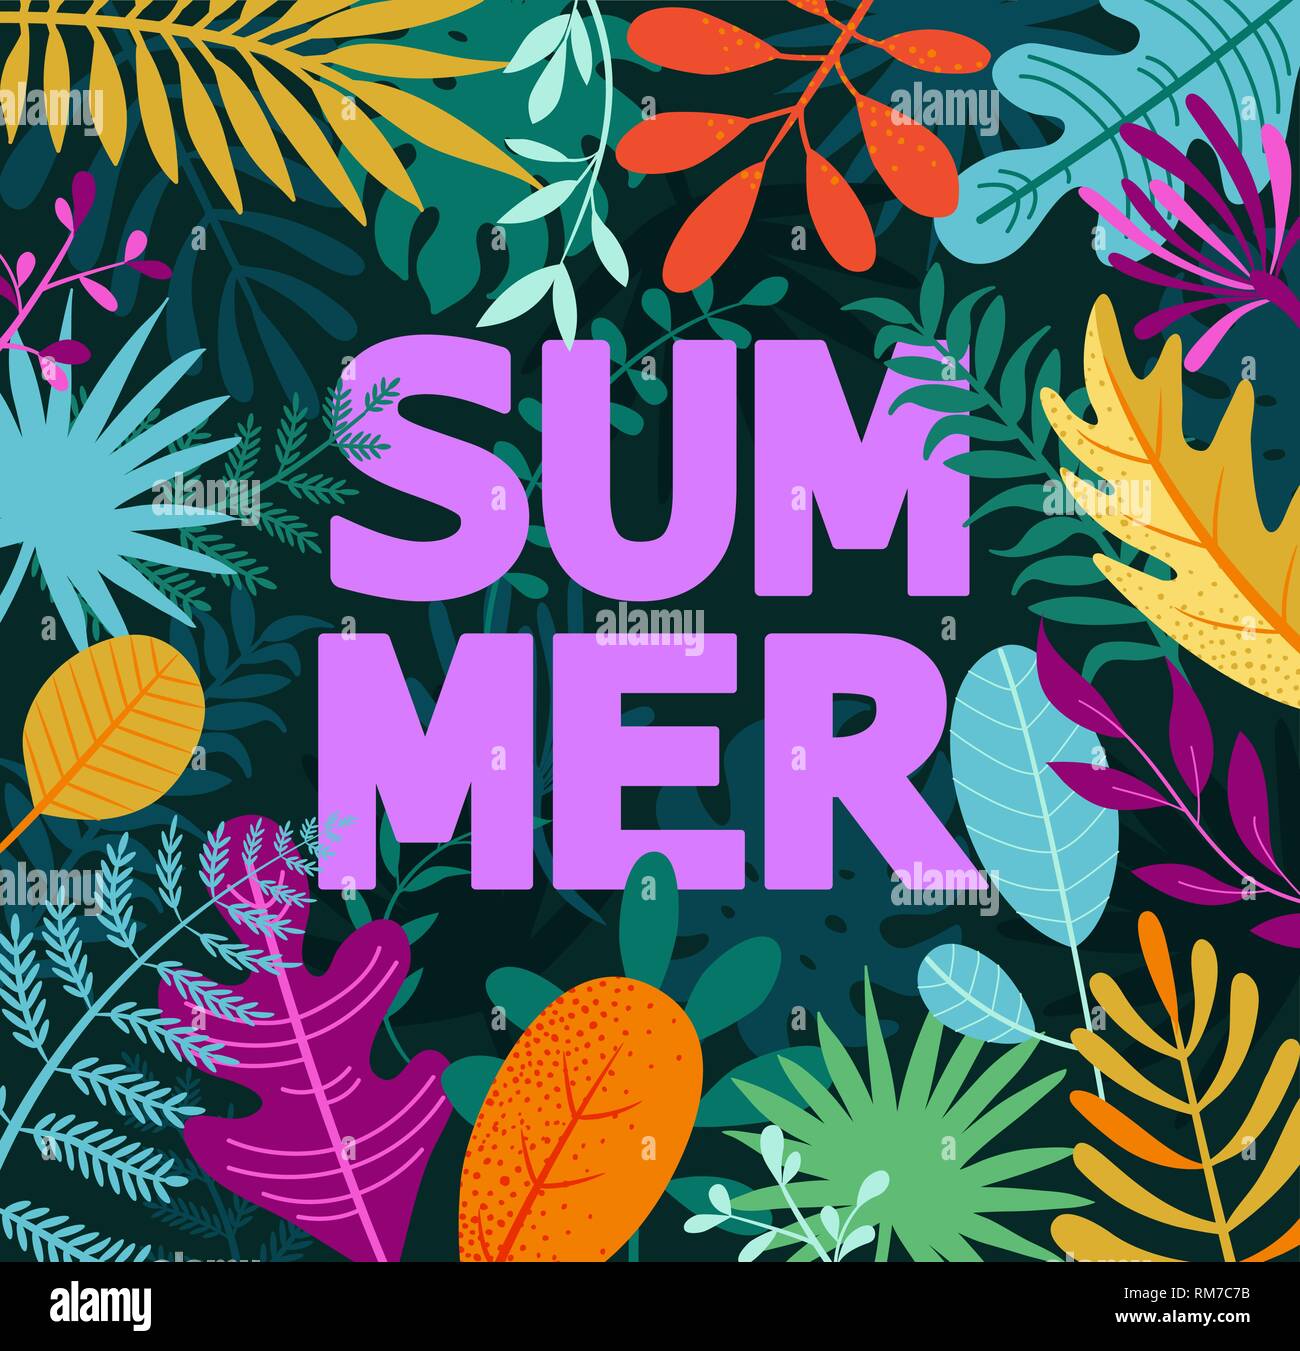 Greeting summer 2019 card on tropical leaves. Stock Vector